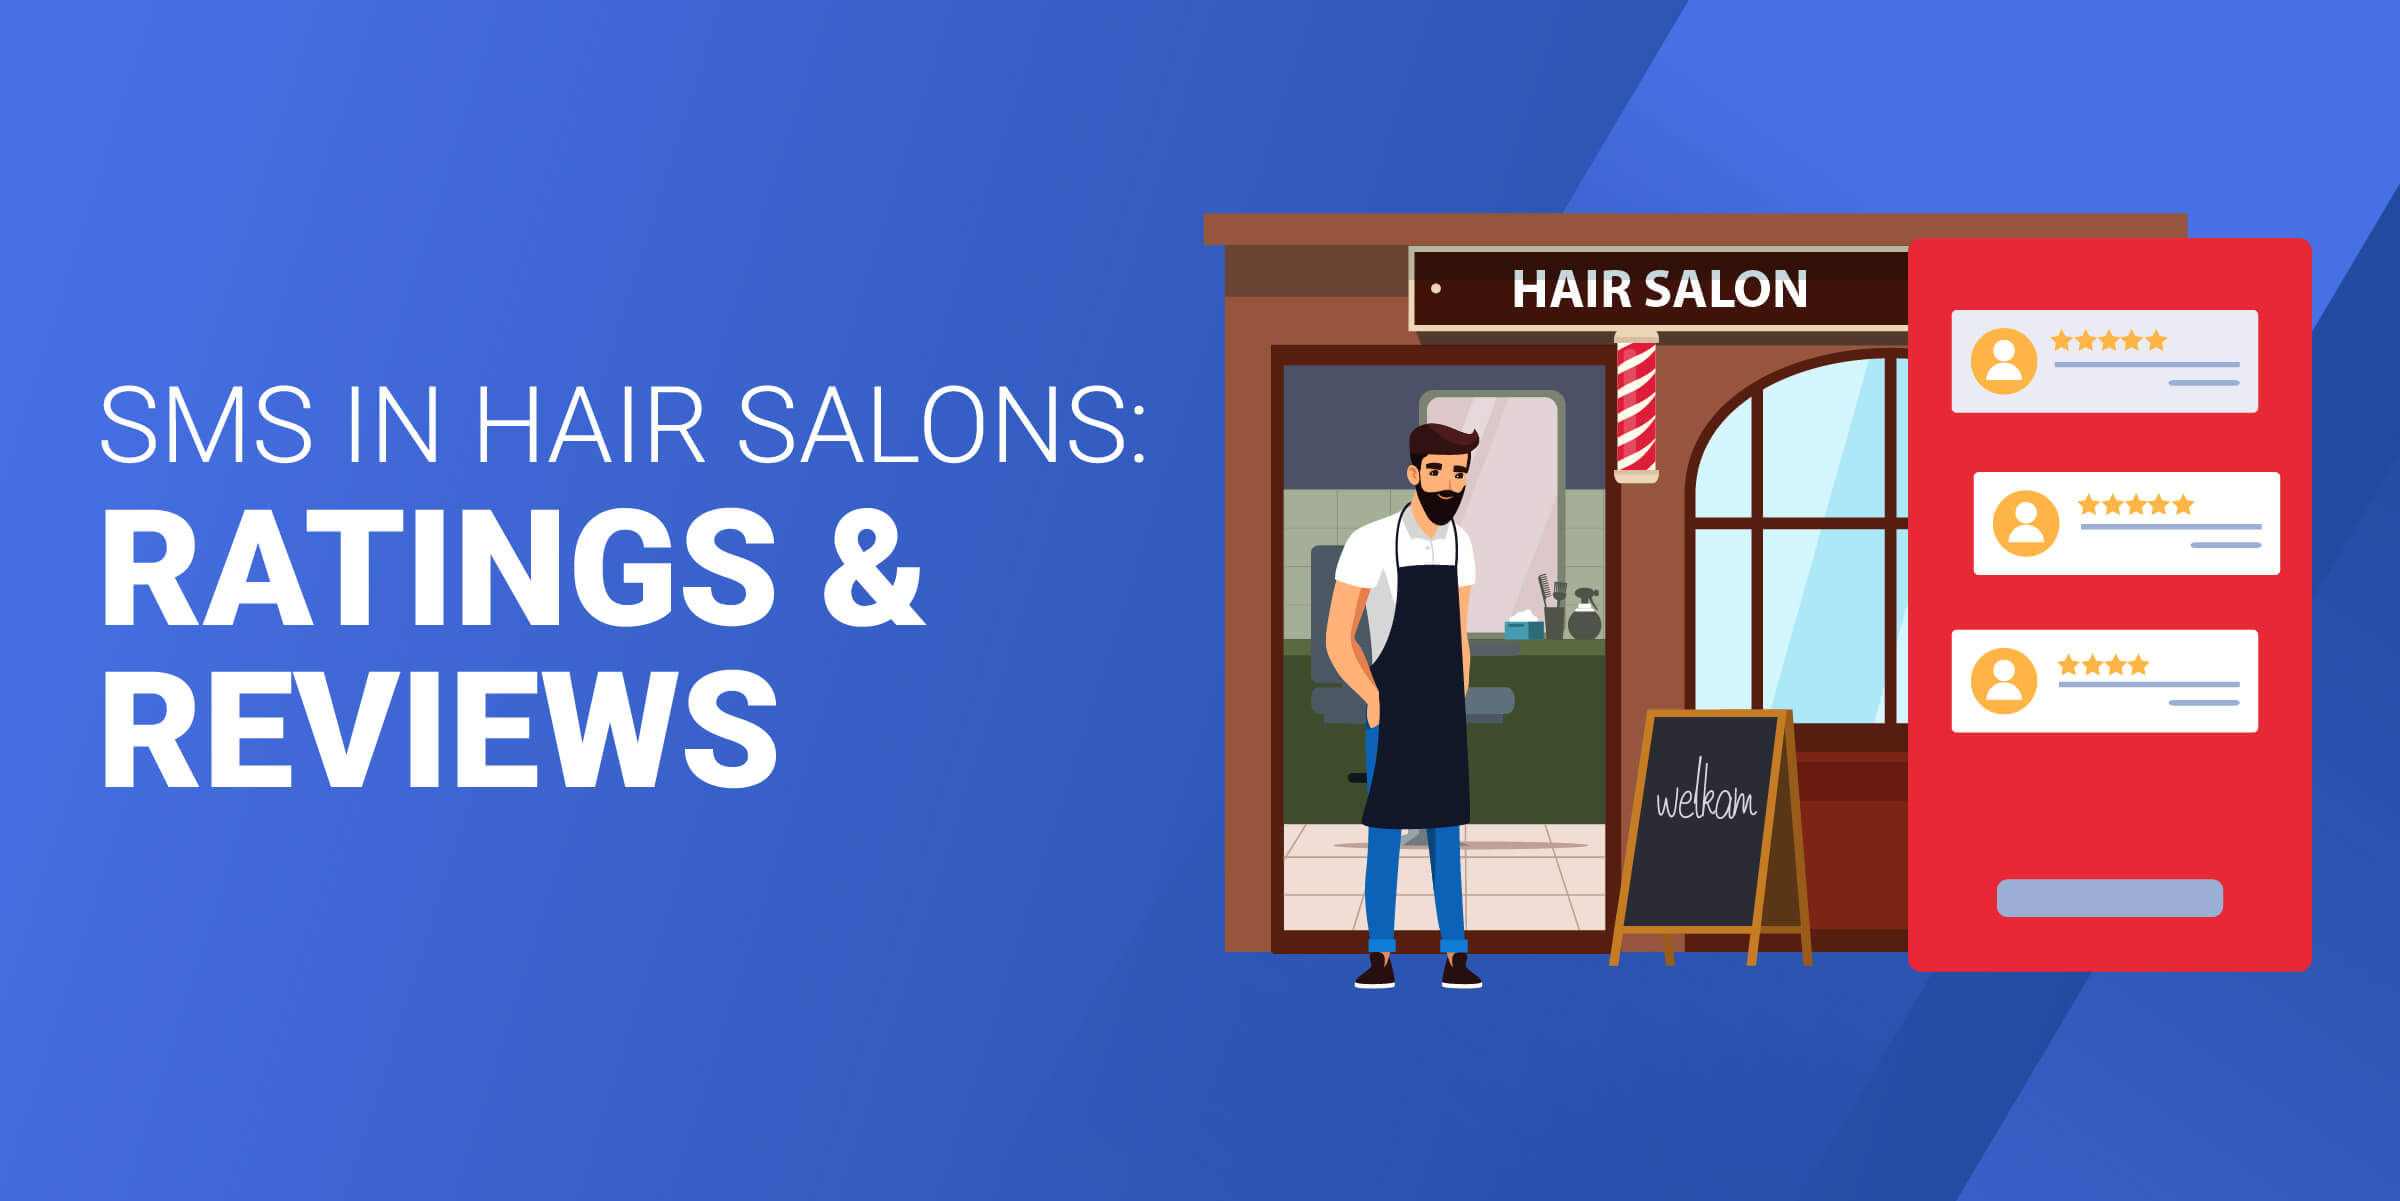 SMS in Hair Salons Ratings